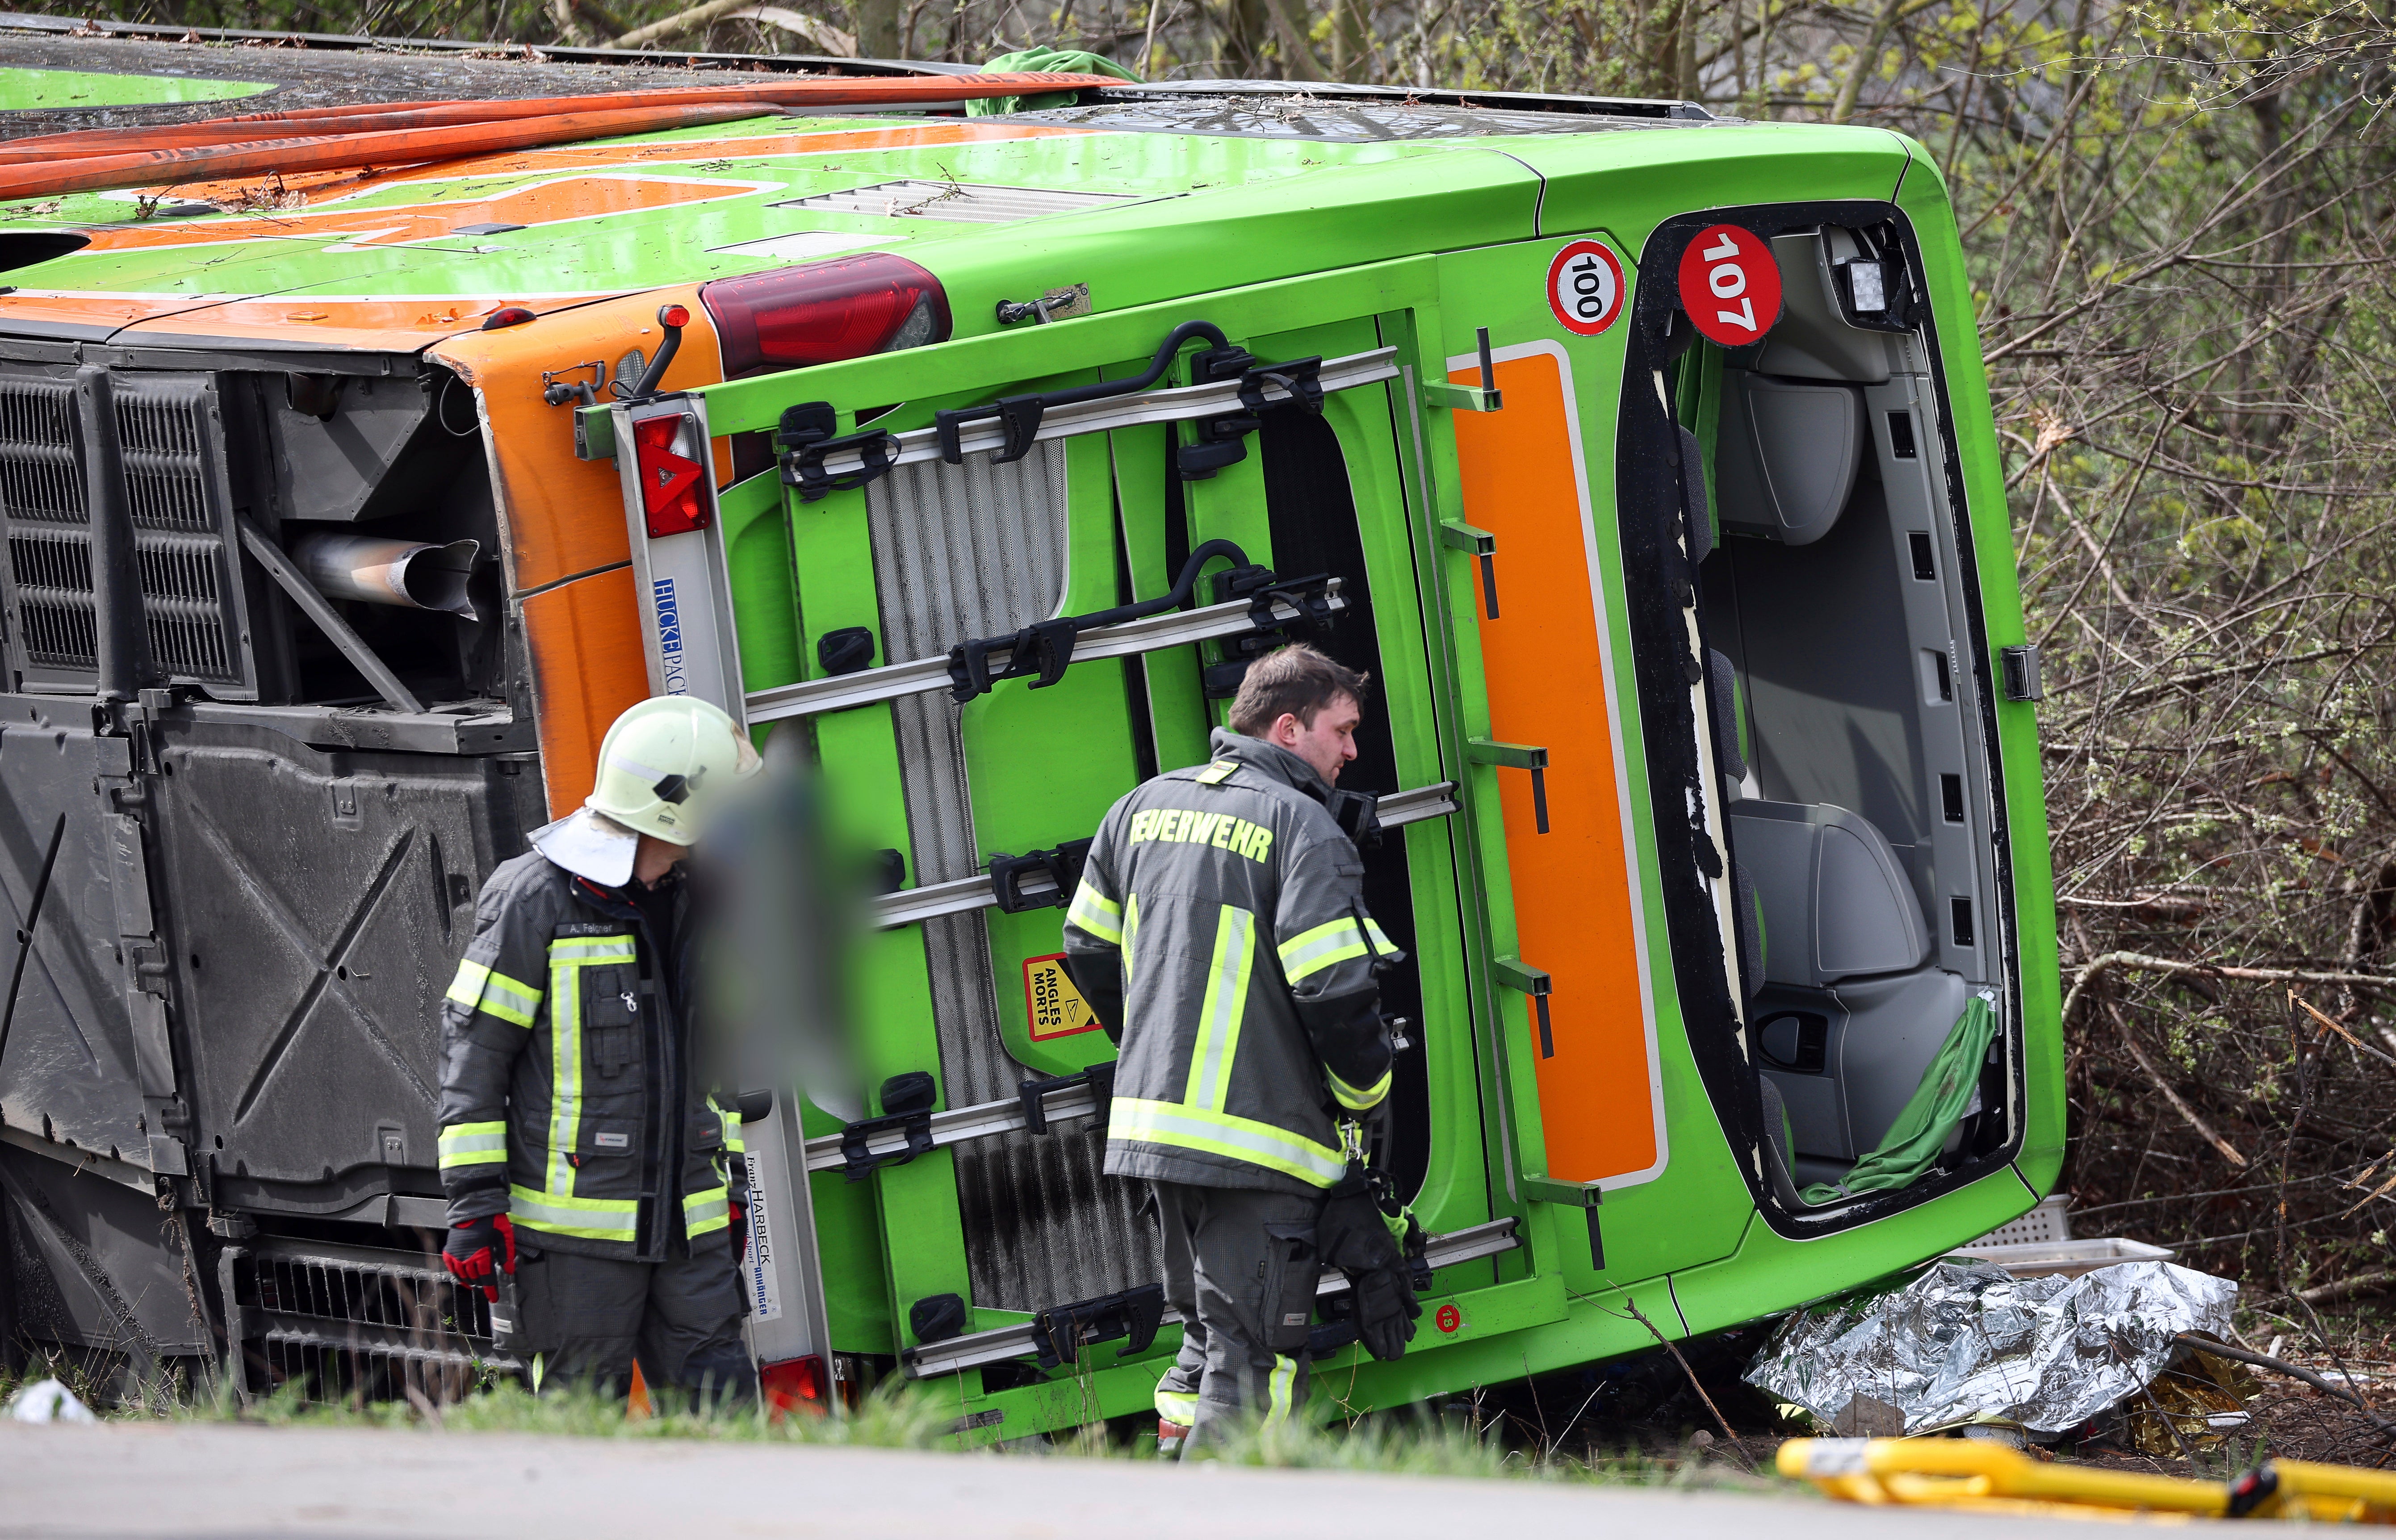 A coach lies overturned on its side at the scene of an accident on the A9, near Schkeuditz, Germany